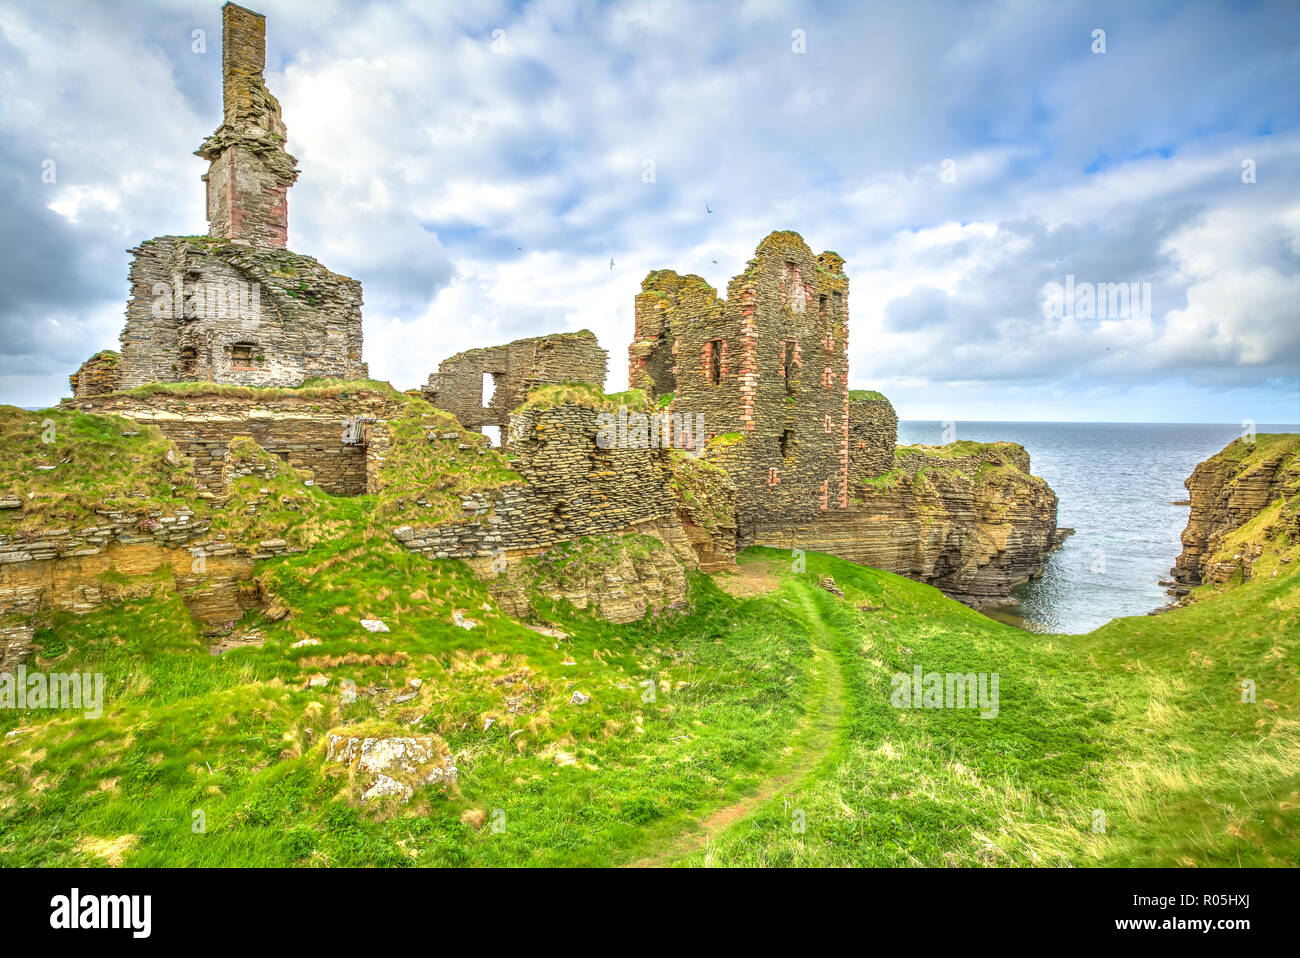 Scottish fortress of Castle Sinclair Girnigoe, the most spectacular ruin in the North of Scotland, in the Highlands near Wick on the east coast of Caithness. Stock Photo